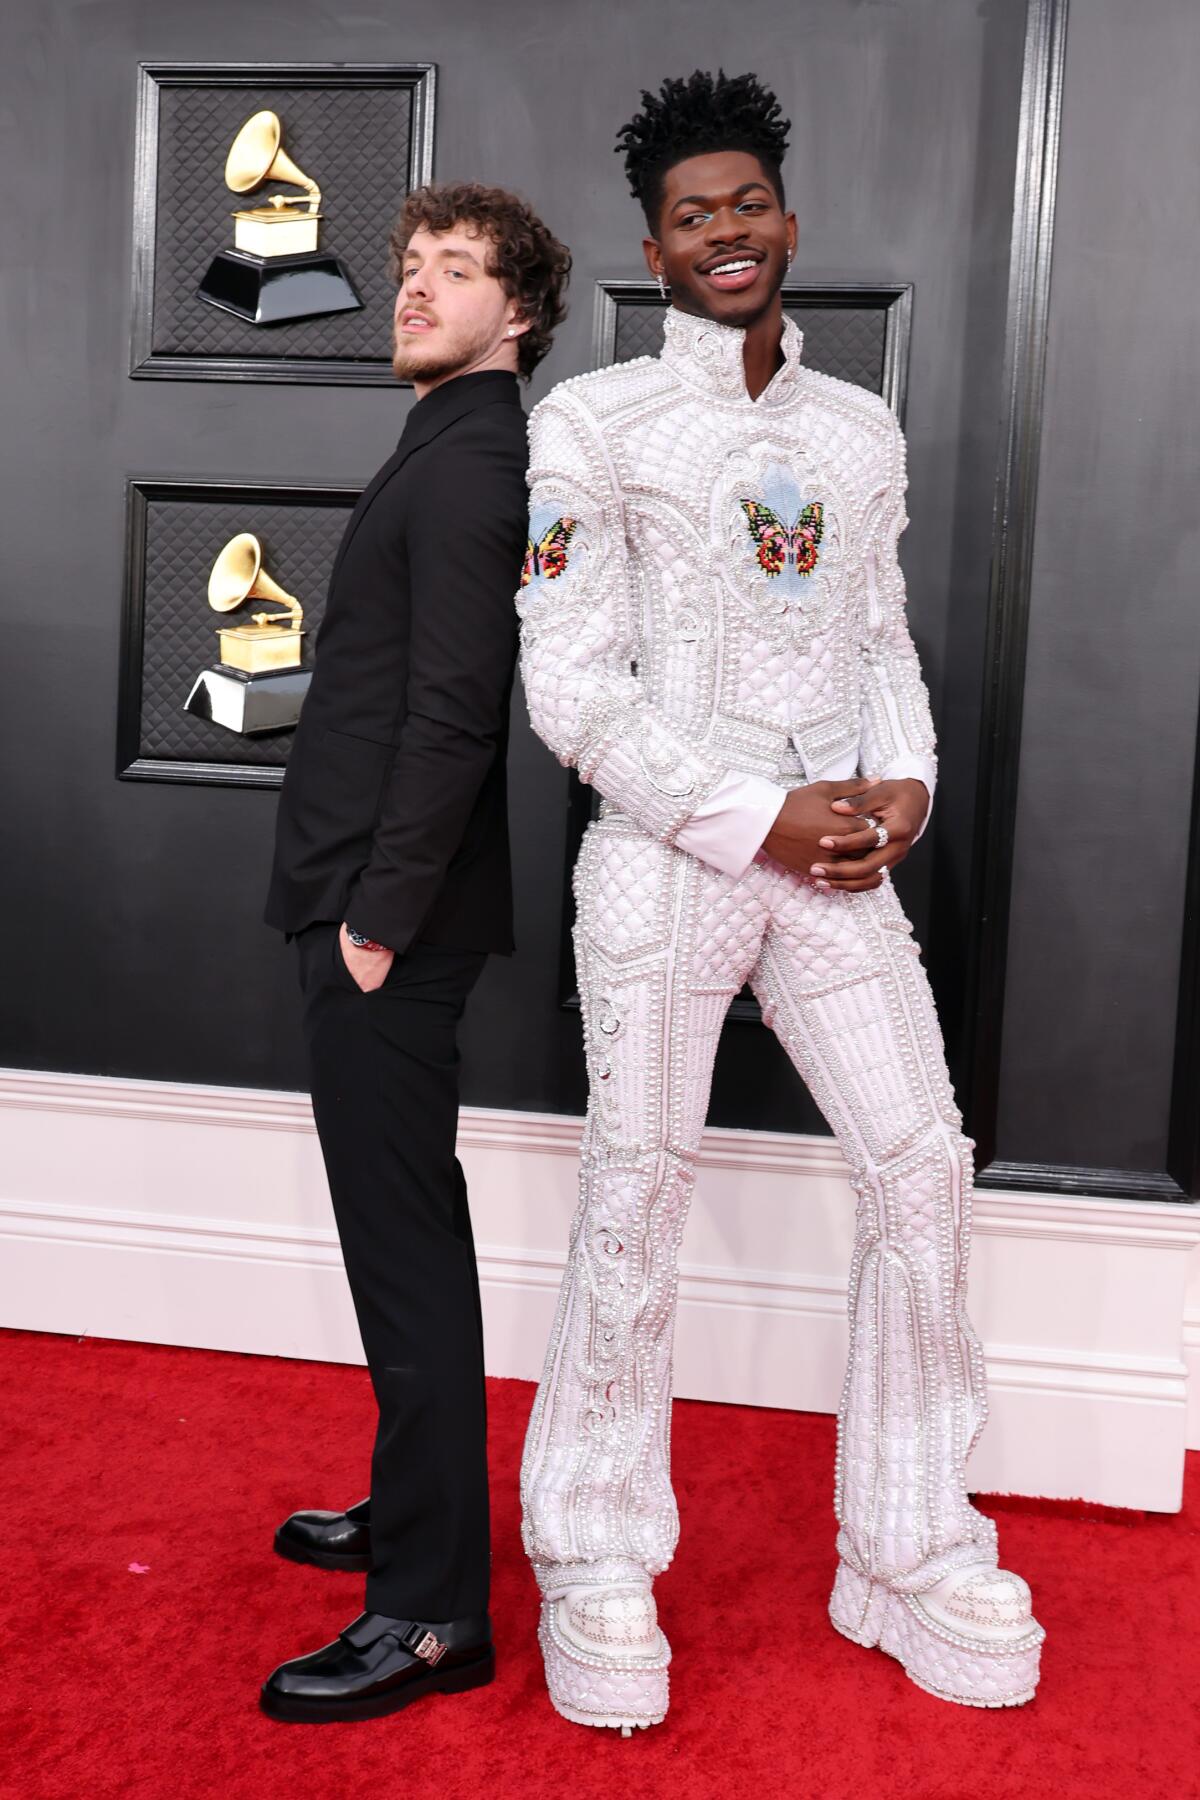 Jack Harlow and Lil Nas X attend the 64th Grammy Awards